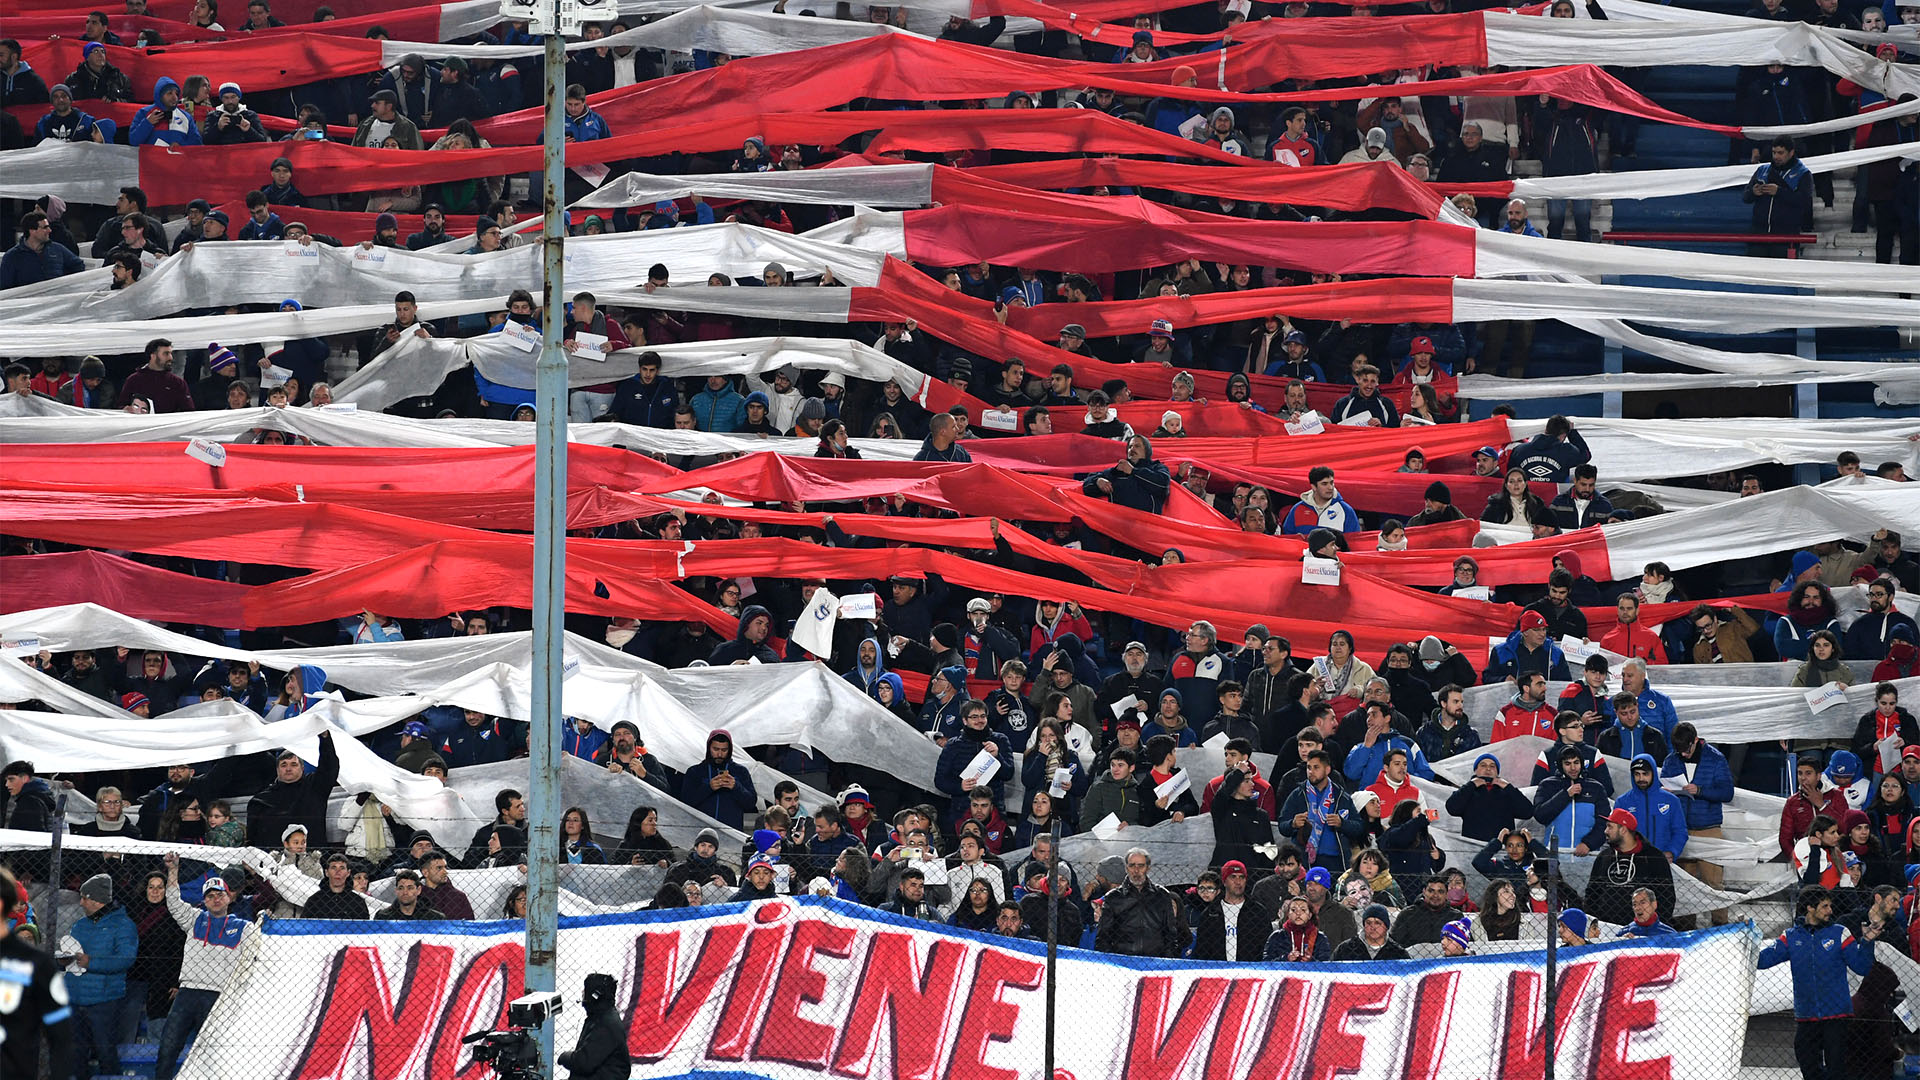 The annual fee for those who live abroad and want to be members of Nacional is US$110 (Photo: Pablo PORCIUNCULA / AFP)